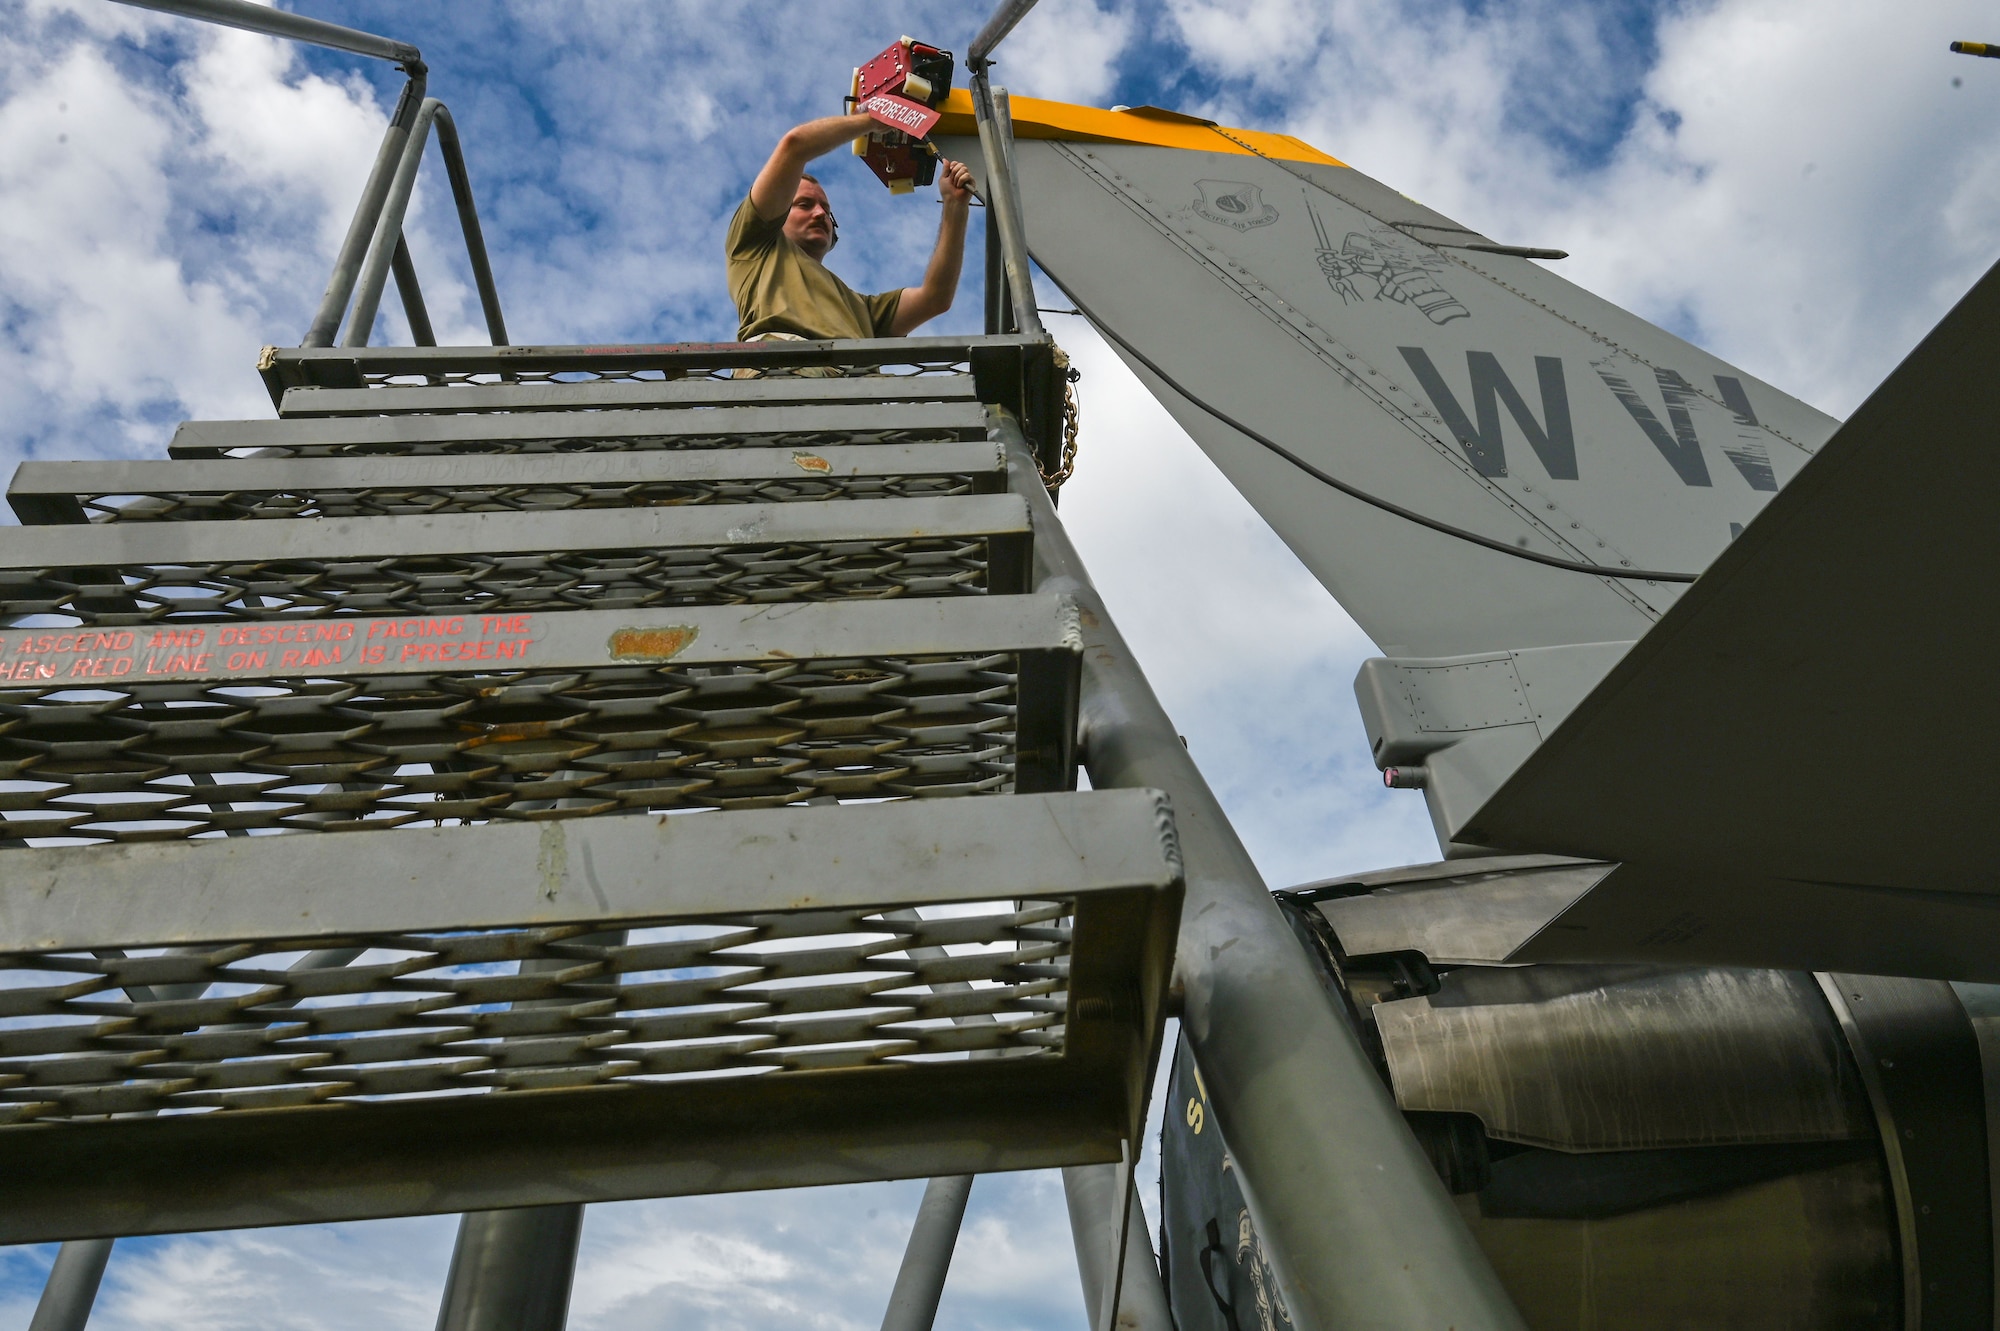 U.S. Air Force Tech. Sgt. Jacob Redding, 87th Electronic Warfare Squadron Combat Shield flight chief, from Nellis Air Force Base, Nev., installs the Radar Warning Receiver aft coupler on a U.S Air Force F-16 Fighting Falcon at Misawa Air Base, Japan, Aug. 9, 2023. Combat Shield is responsible for assessing the defensive system readiness of Combat Air Forces (CAF) aircraft by deploying assessment teams with specialized equipment to provide senior leadership an independent assessment of the overall health of CAF systems. (U.S. Air Force photo by Staff Sgt. Ericka A. Woolever)